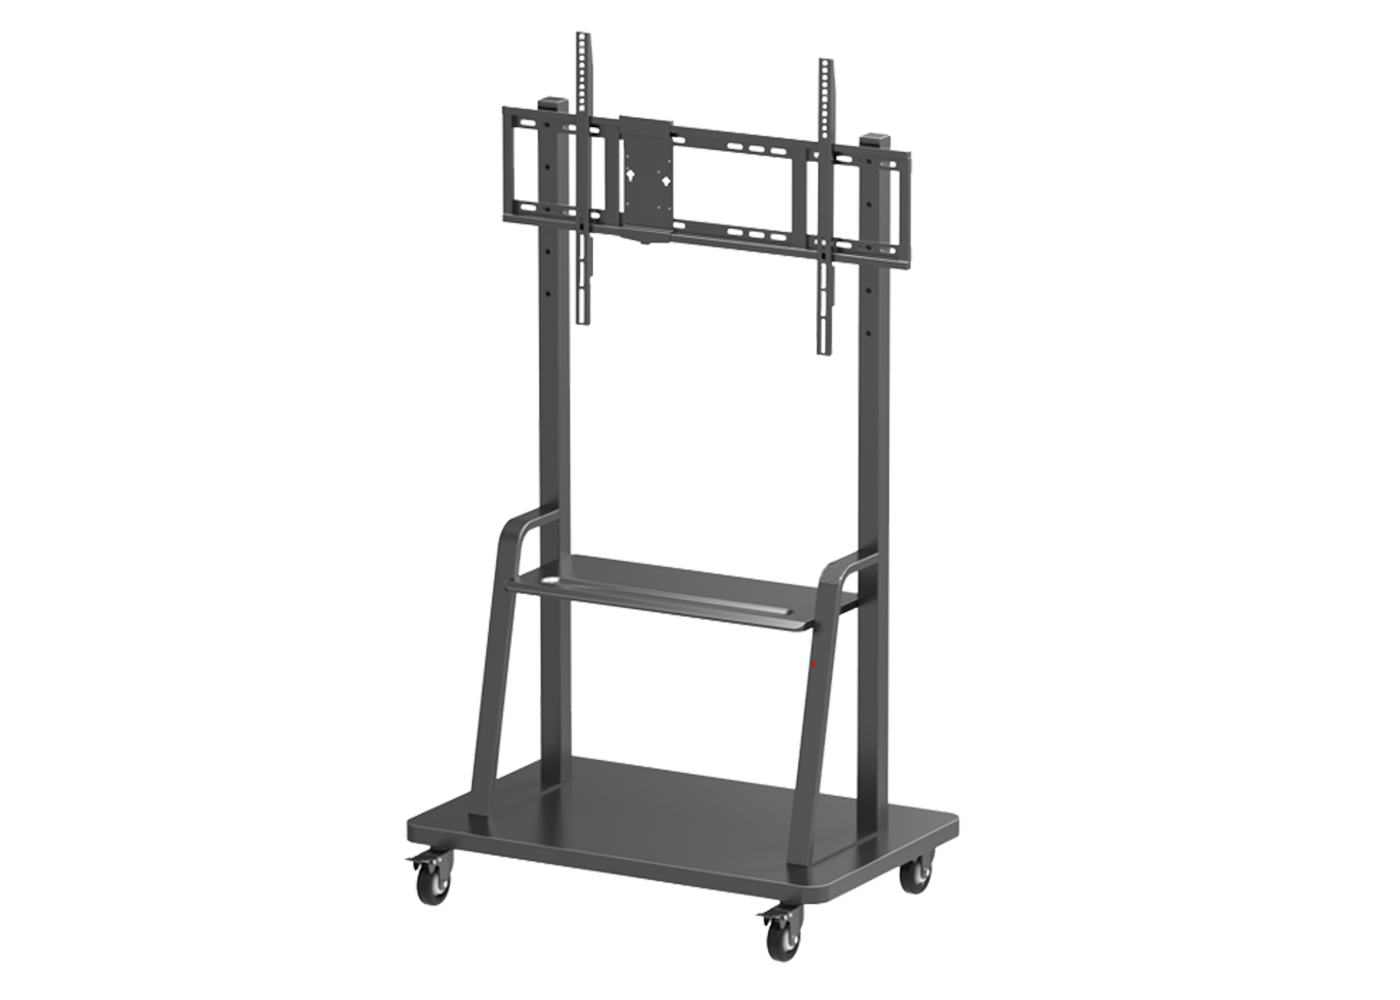 Robust and compact mobile stand for interactive SMART displays, ensuring safe and flexible positioning.